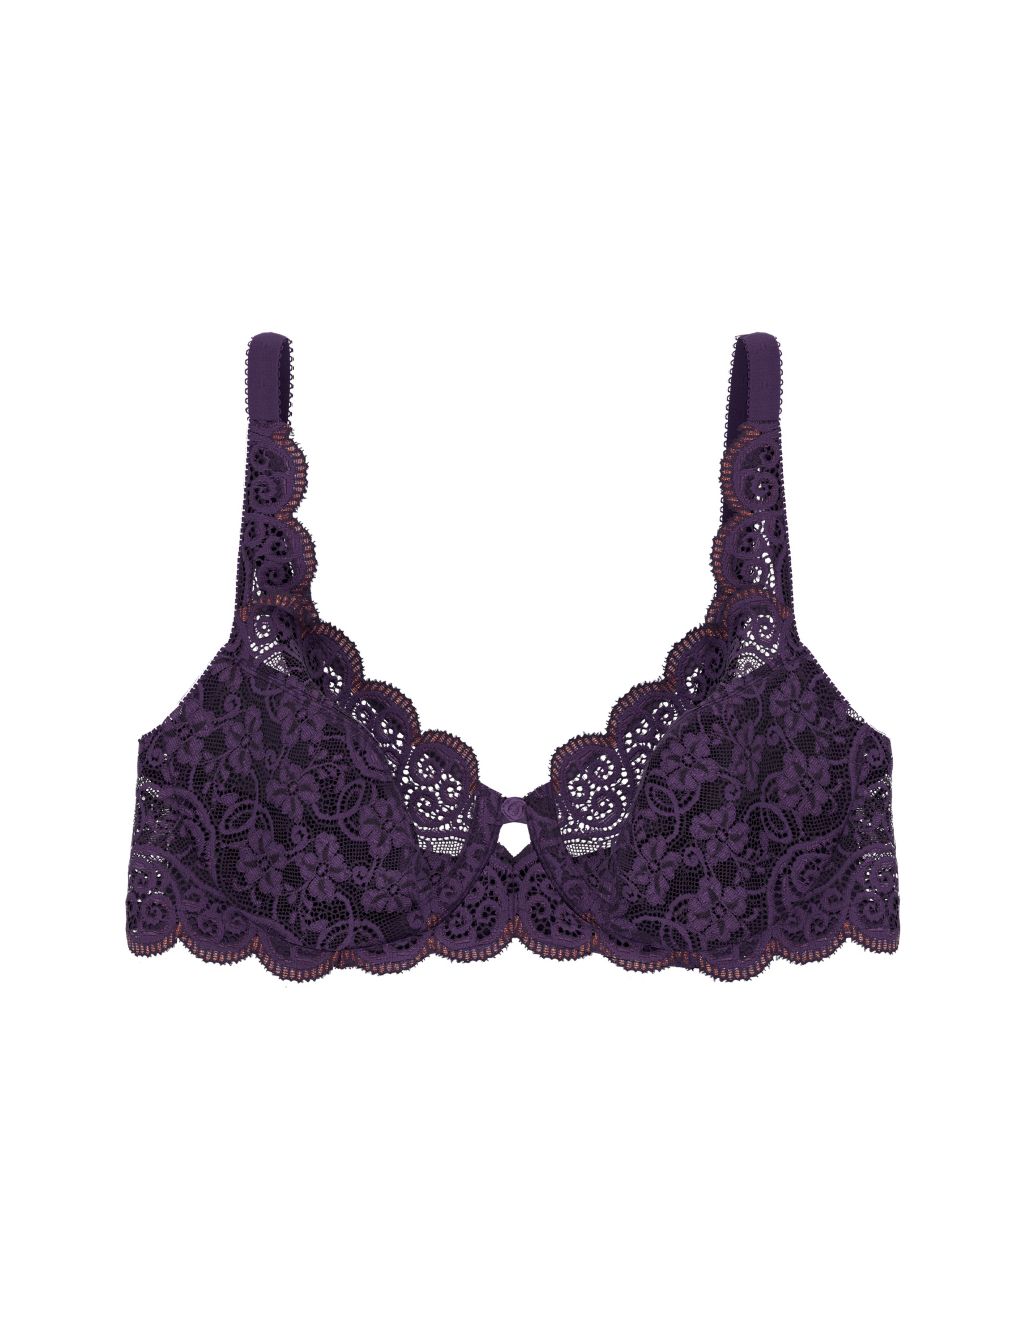 Amourette 300 Lace Underwired Full Cup Bra B-G image 2